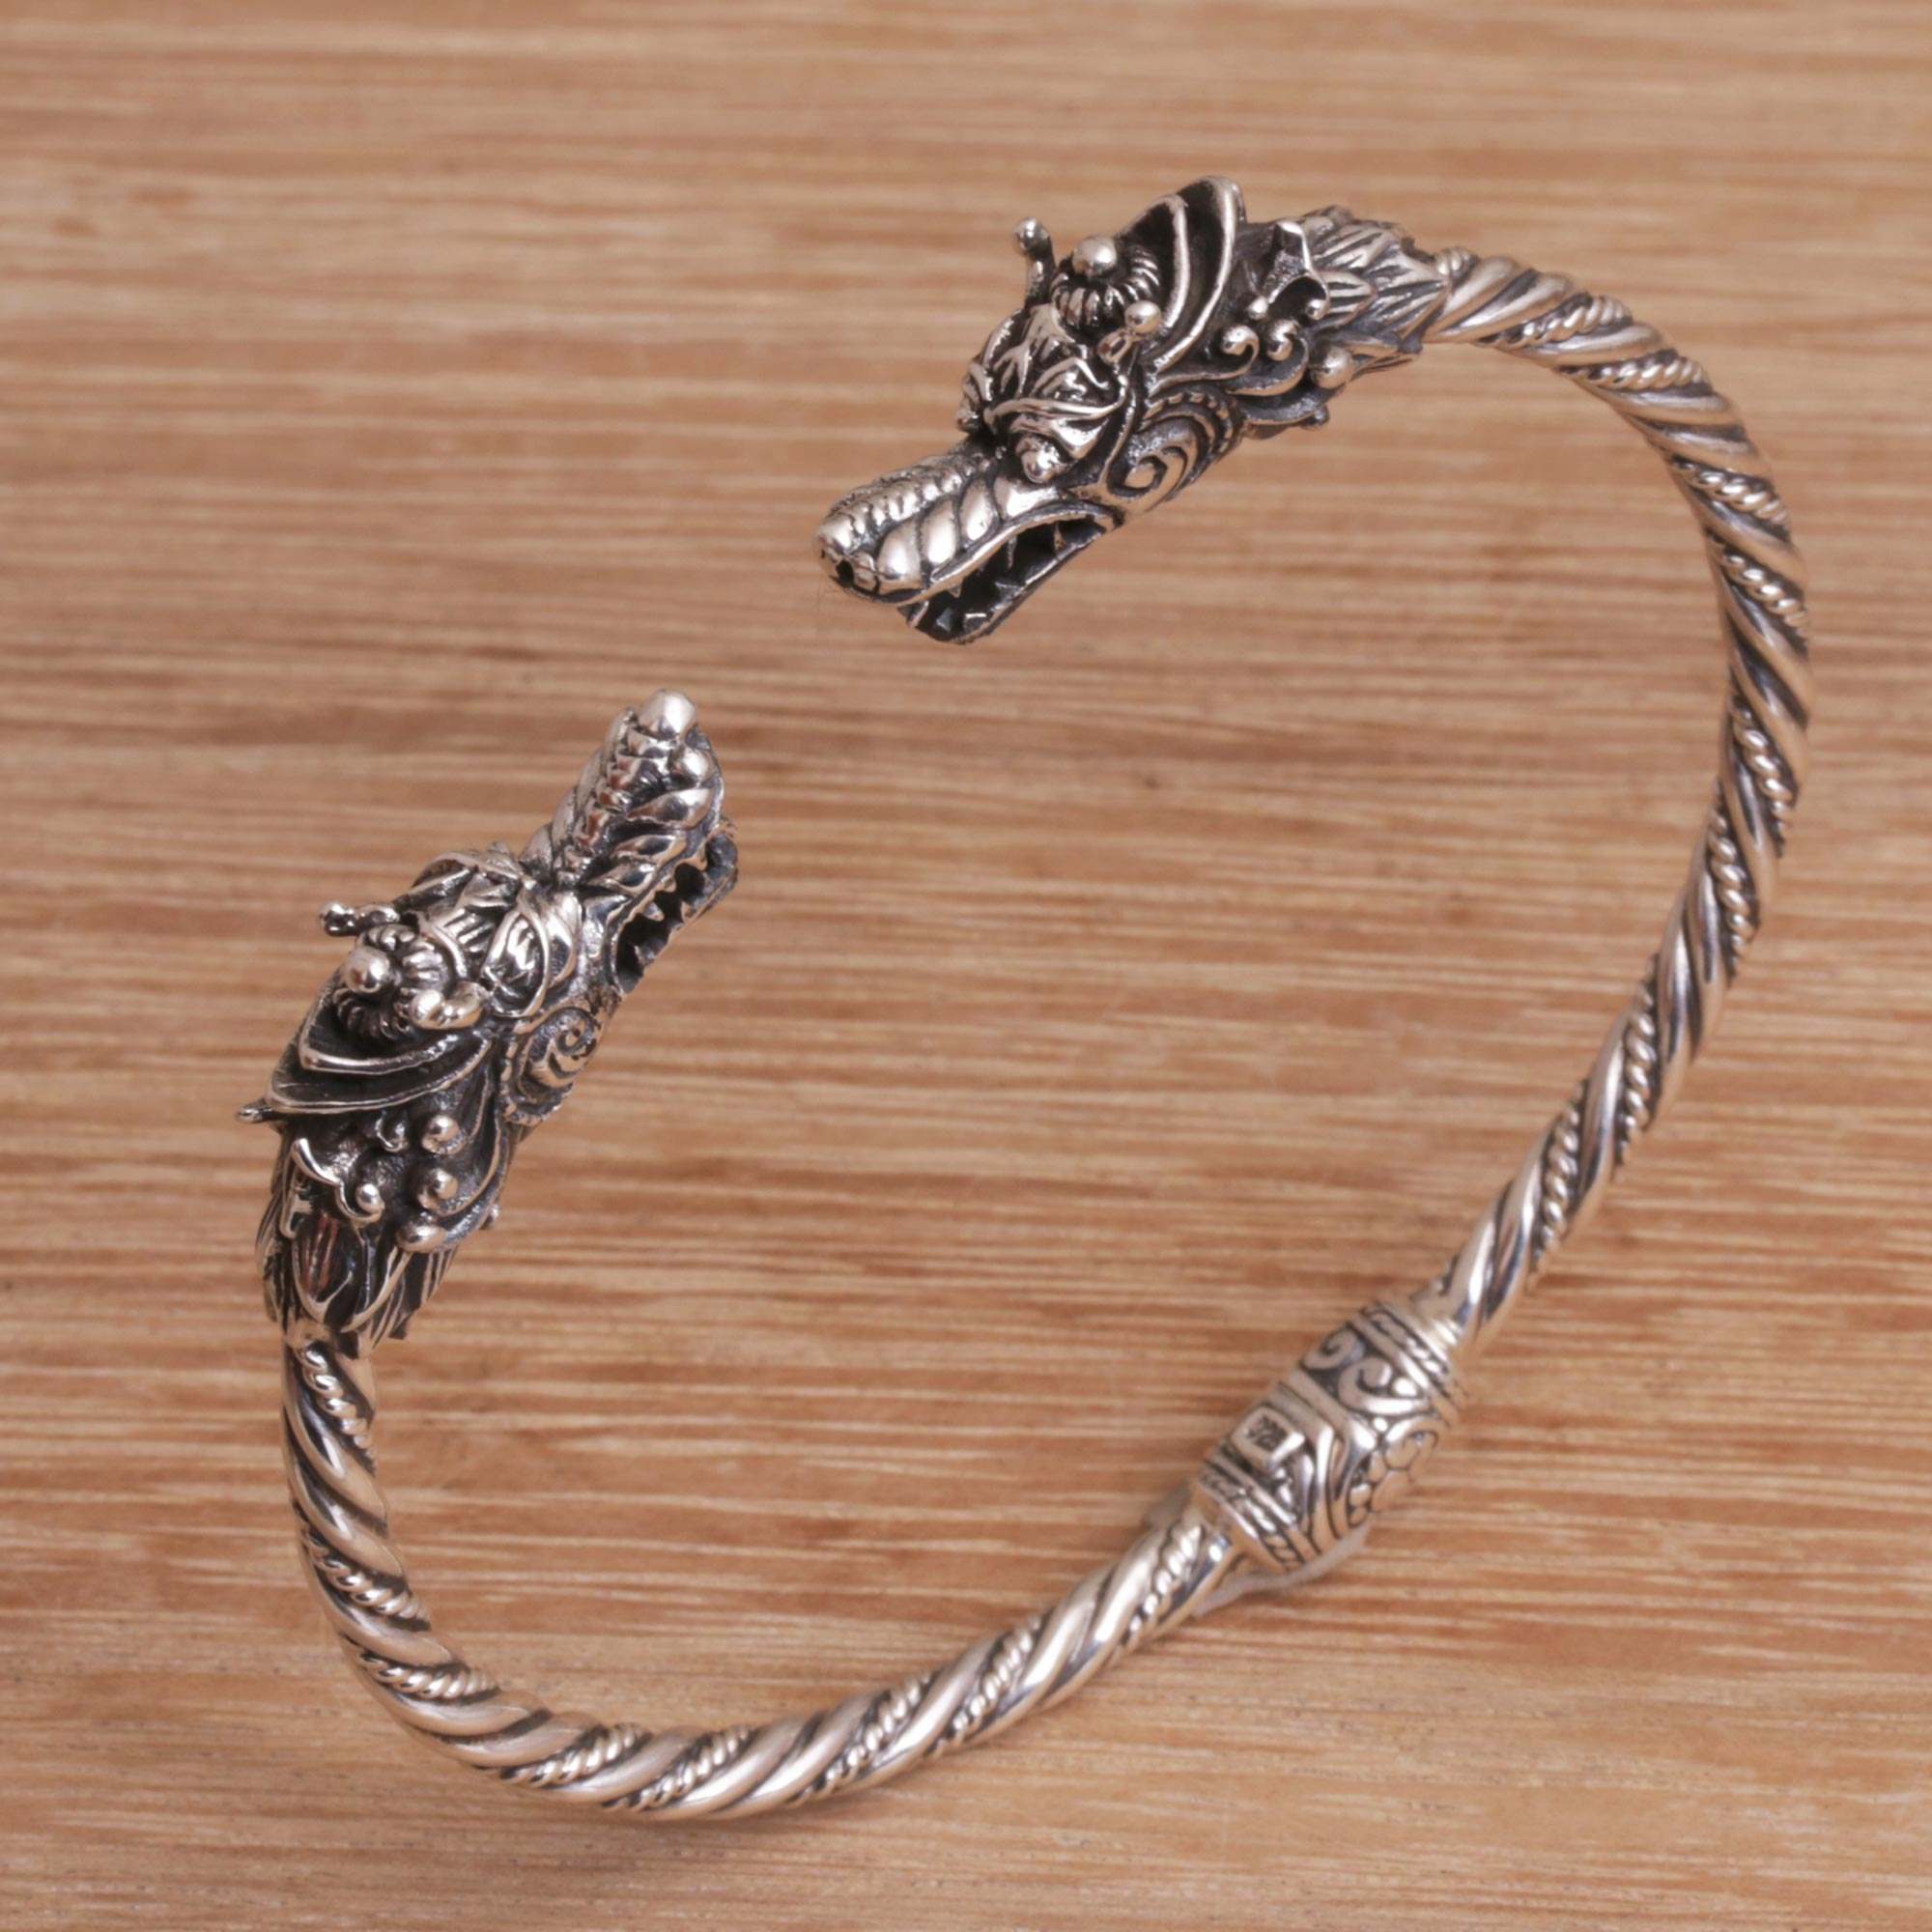 Dragon-Themed Sterling Silver Cuff Bracelet from Bali - Dragon Siblings ...